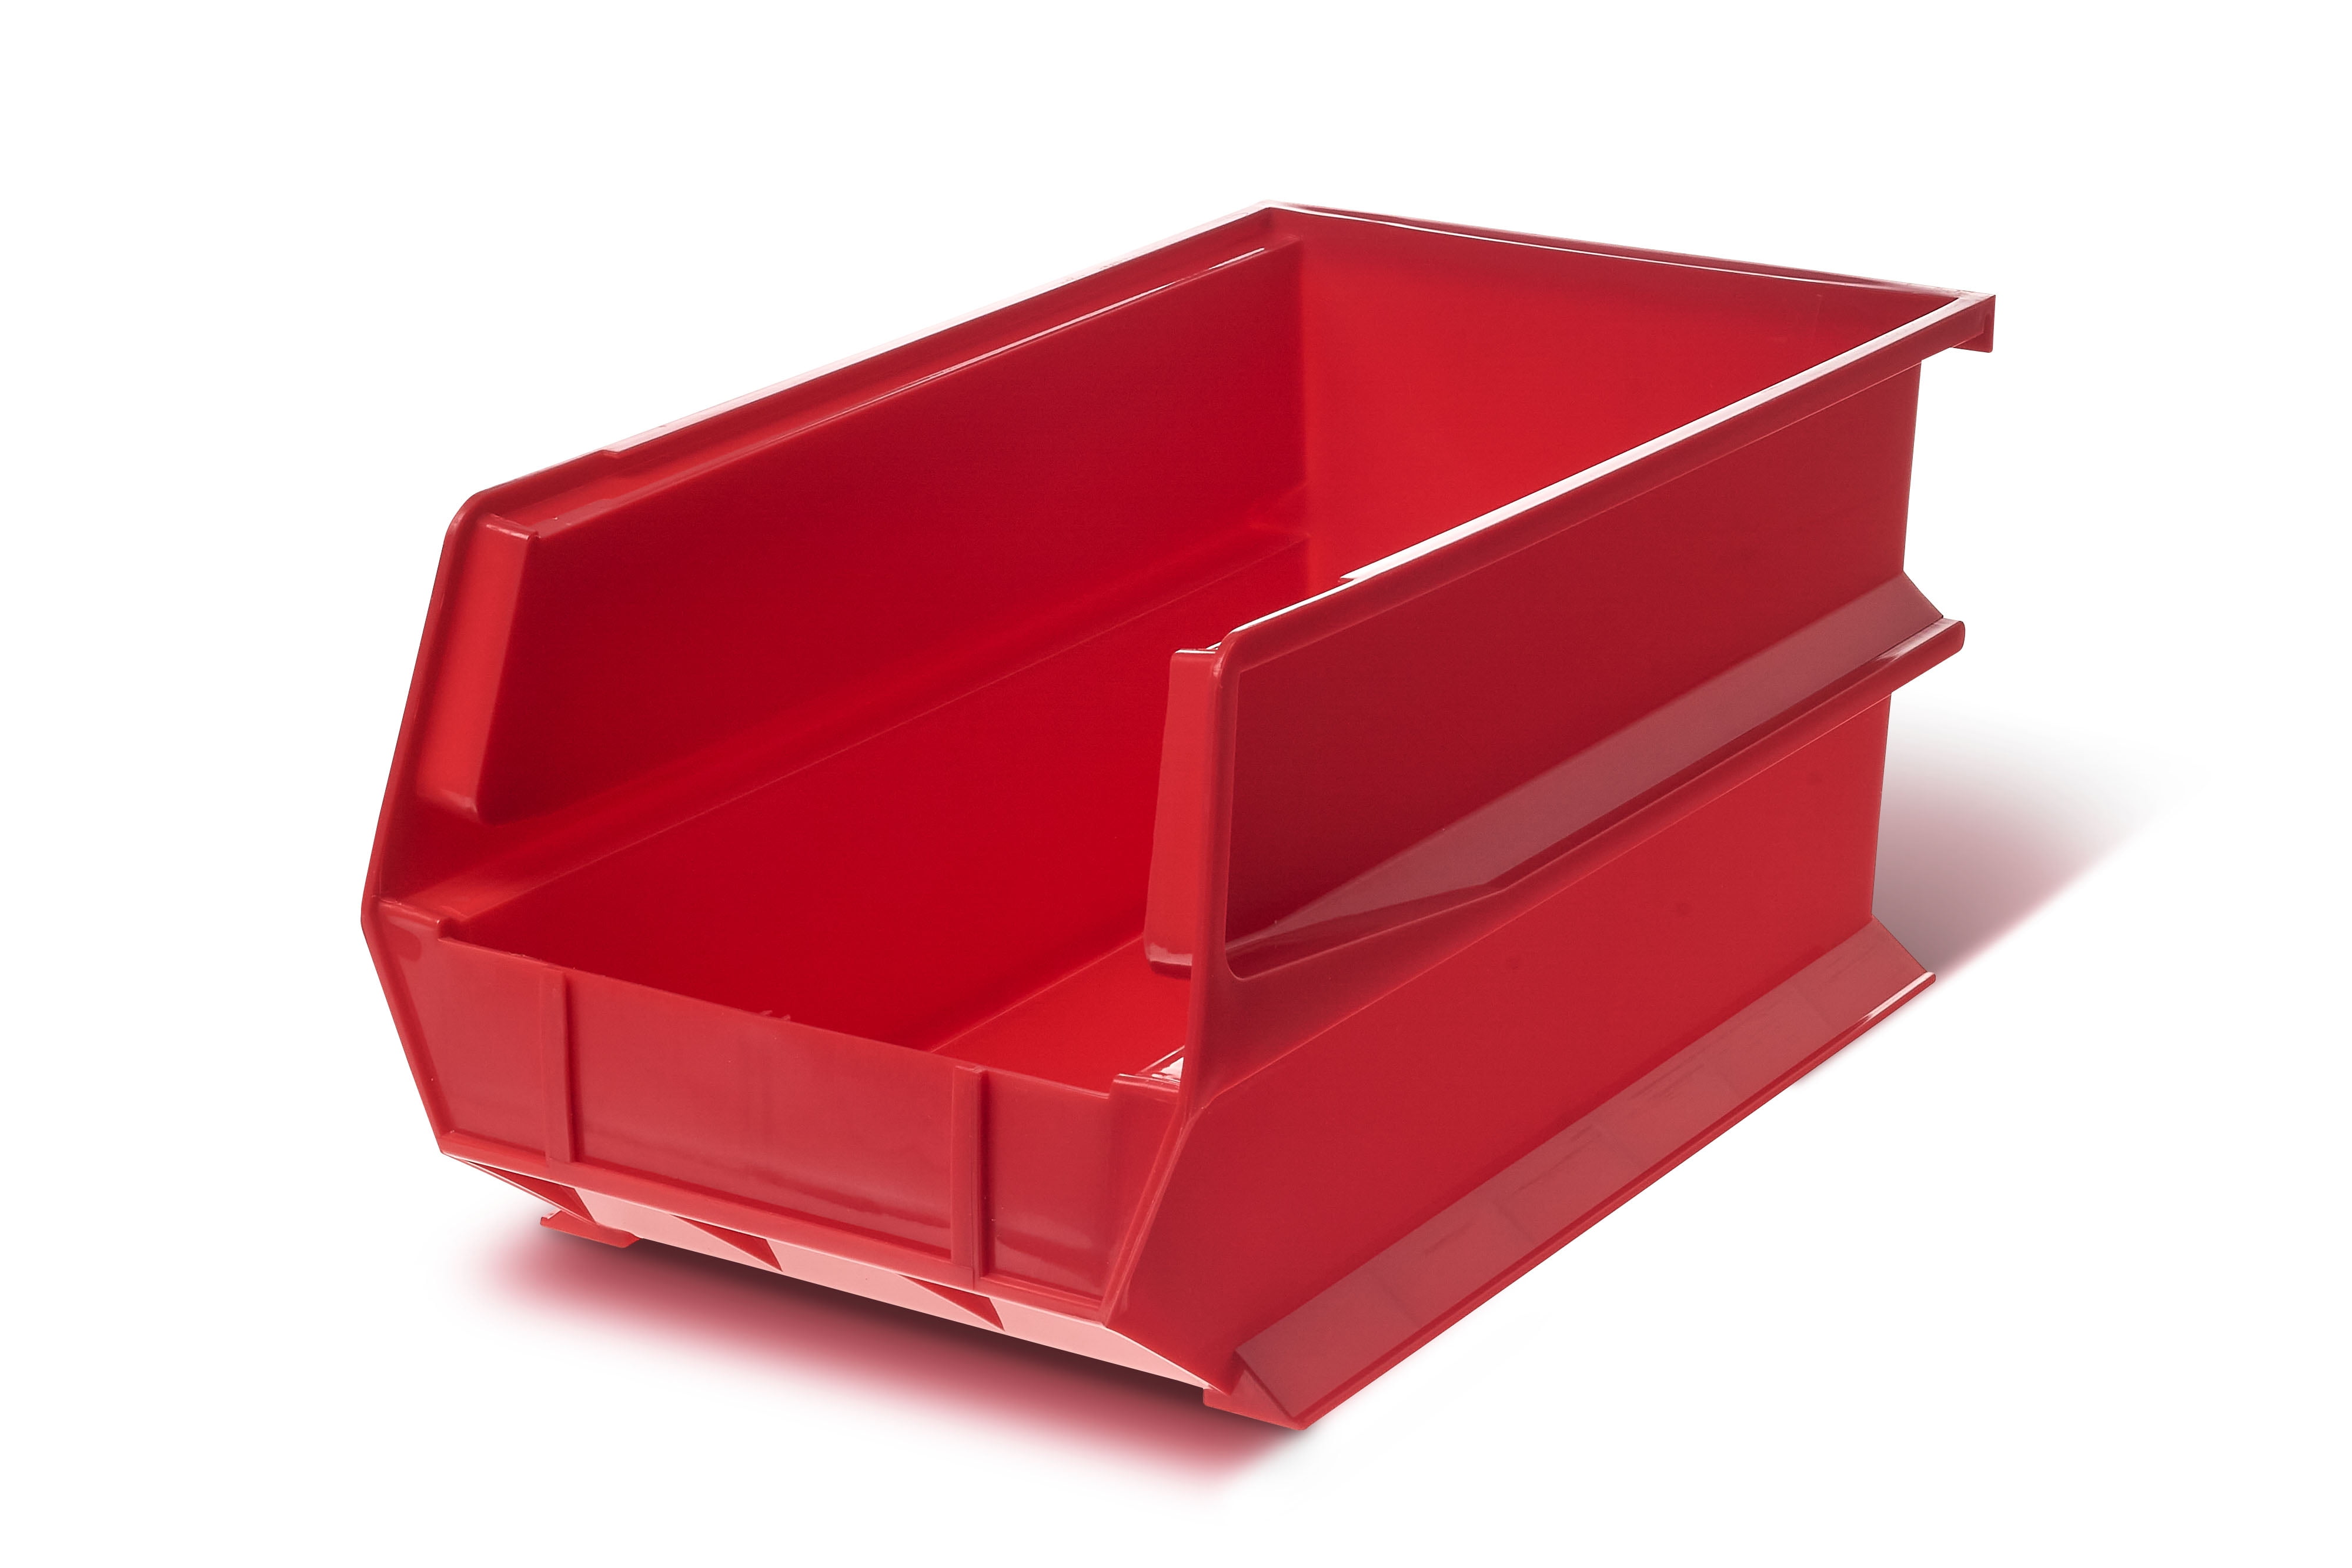 Triton Products 4-1/8 in. W x 3 in. H Red Wall Storage Bin Organizer  (8-Piece) 028-R - The Home Depot